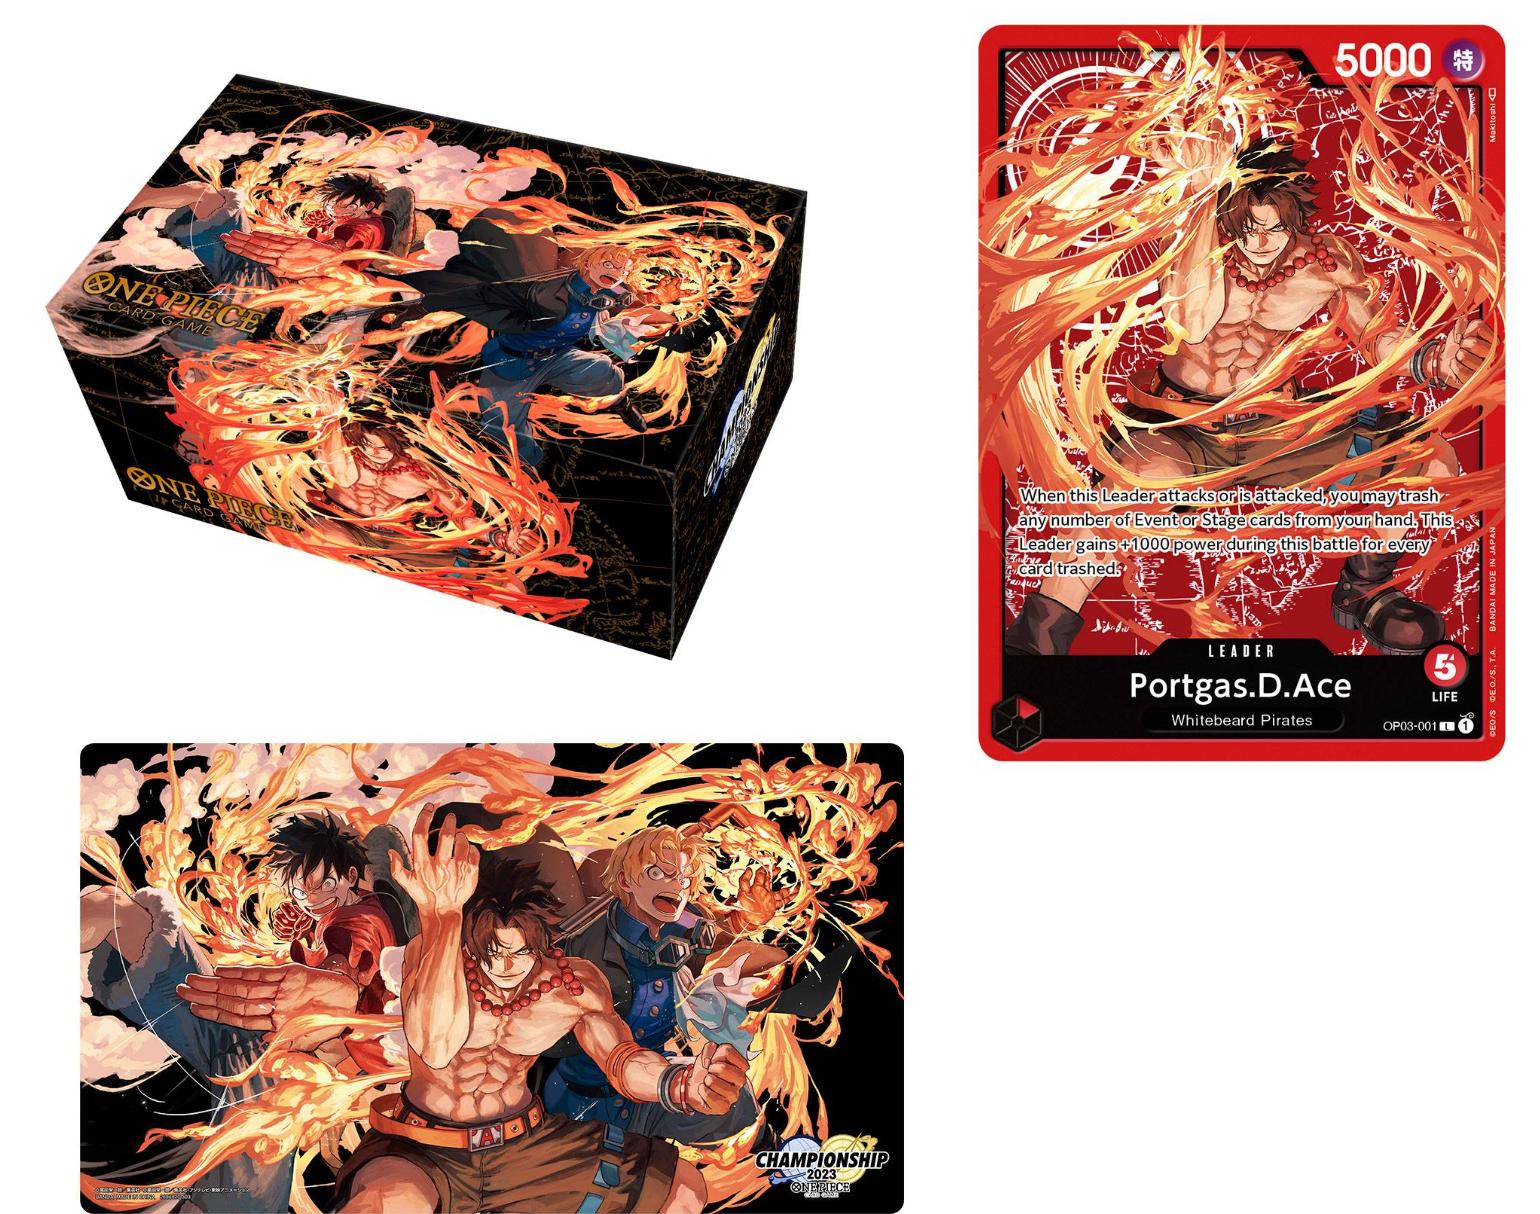 Accessoires One Piece – Cartes One Piece Card Game TCG